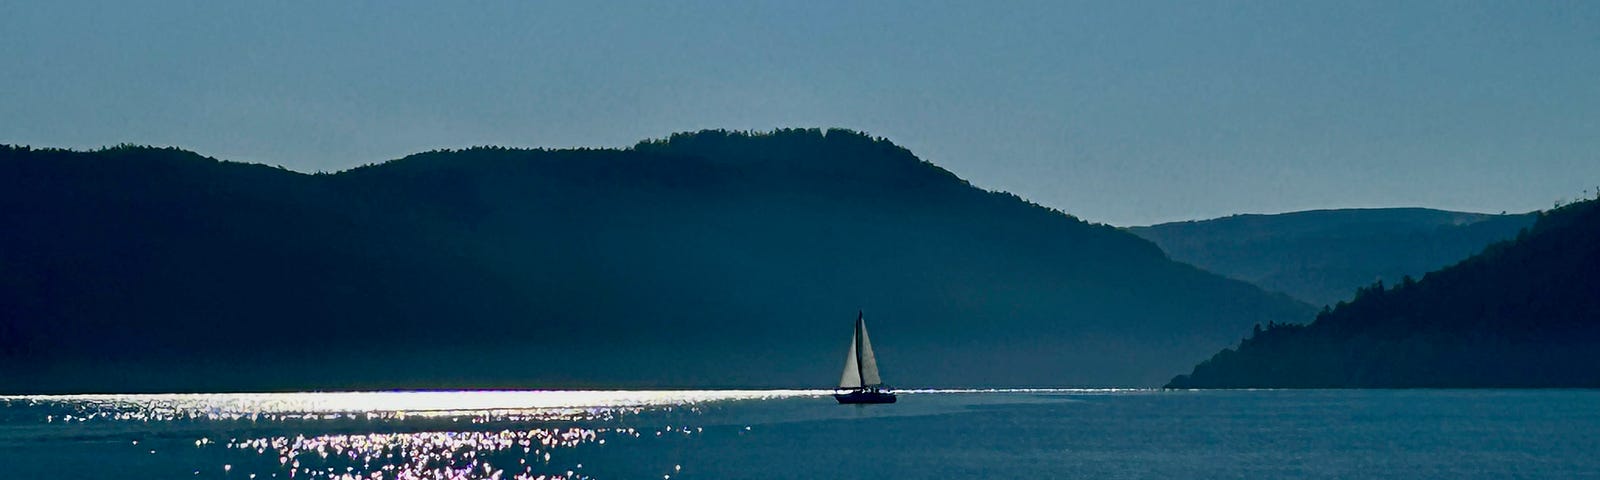 A small sailboat appears across an ocean with hills behind it. The water ripples with sunshine.